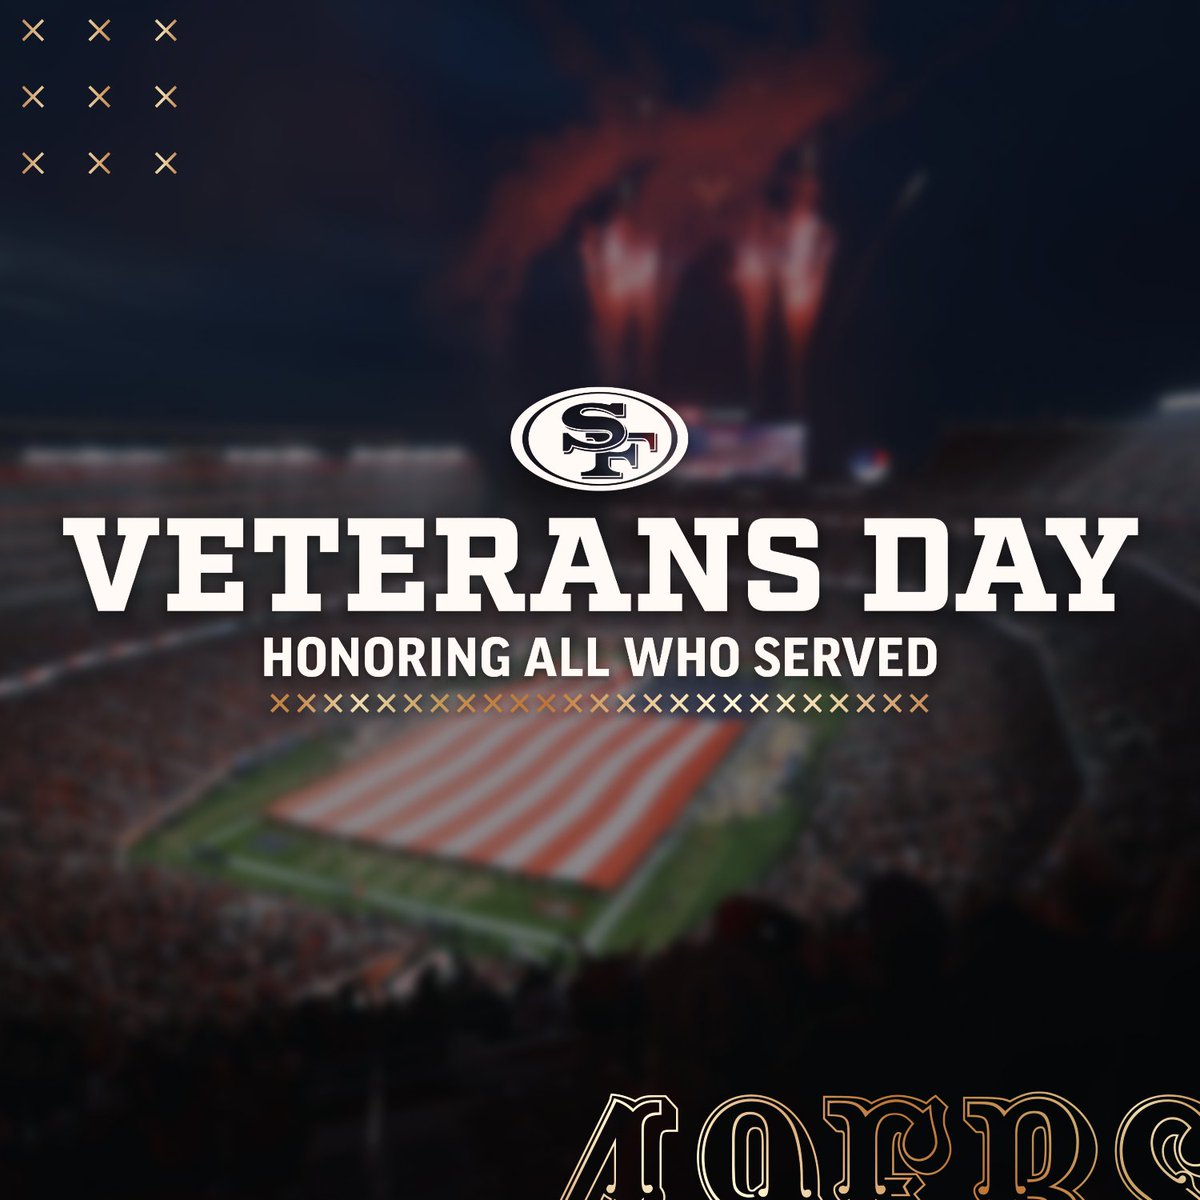 The 49ers thank the heroes among us, our family members, friends, and colleagues for their service to our country. Your courage and sacrifice will never be forgotten. #VeteransDay | #SaluteToService